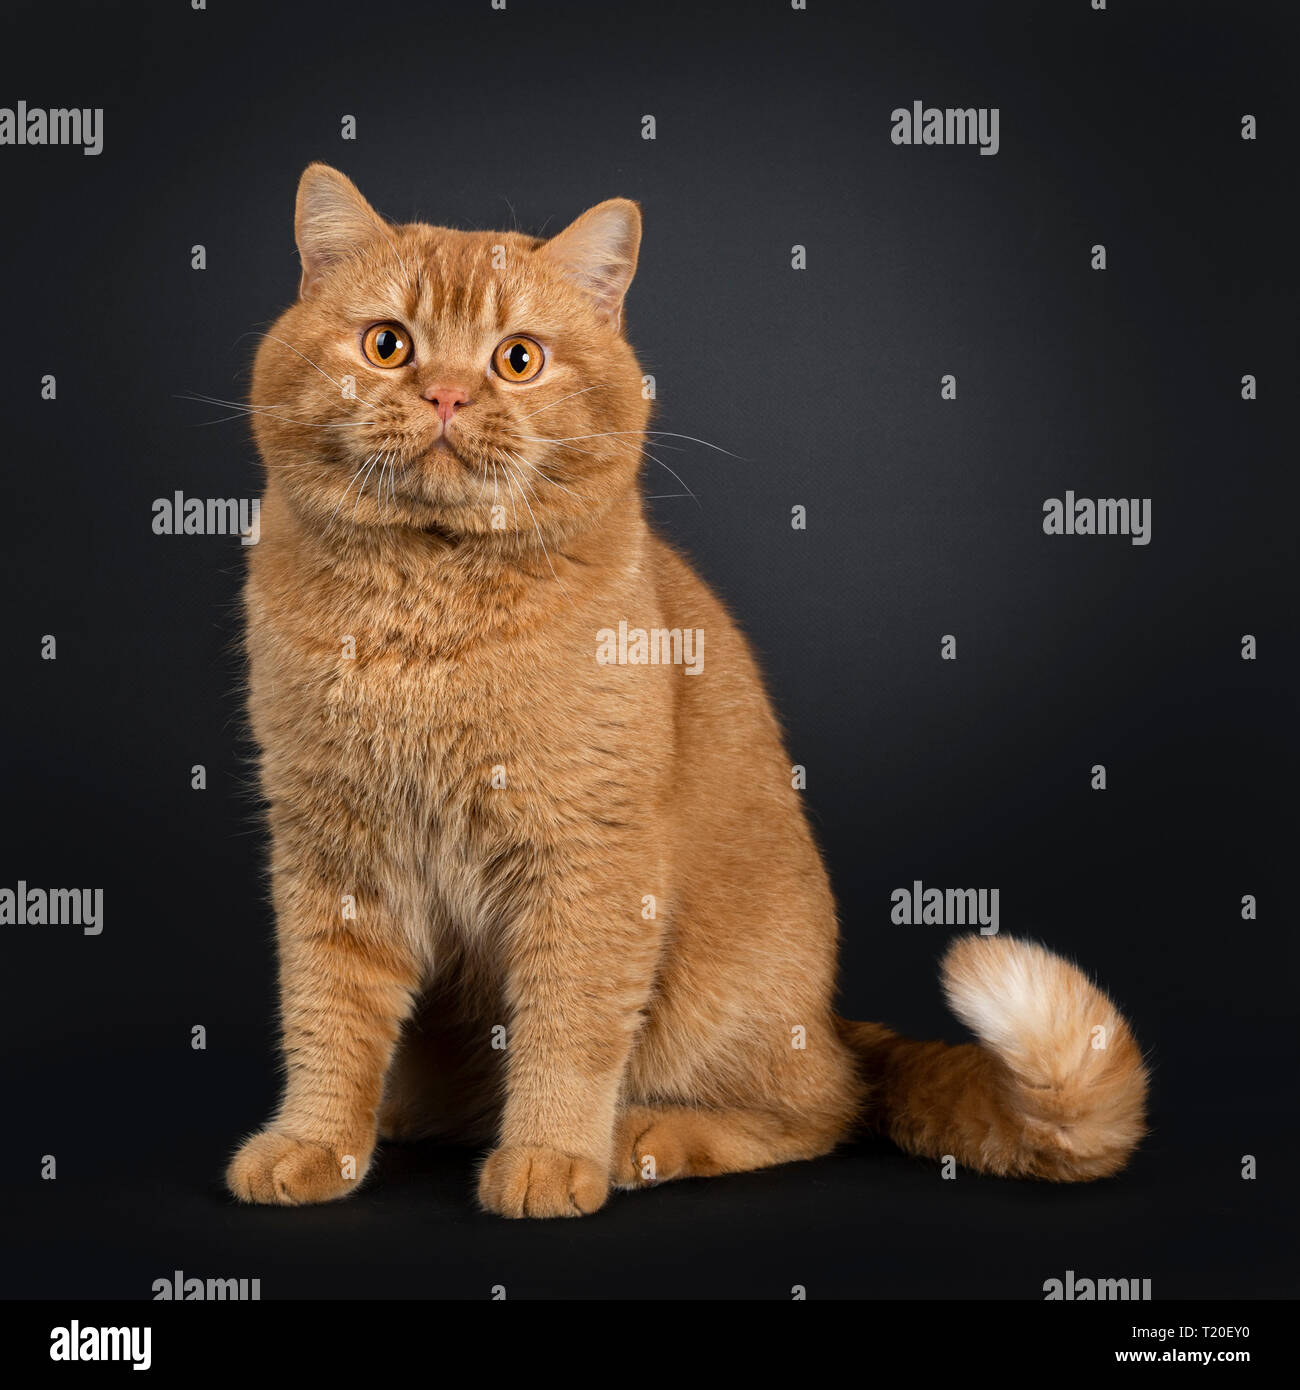 Young adult red British Shorthair male cat, sitting up facing front. Looking at camera with orange eyes. Isolated on black background. Stock Photo